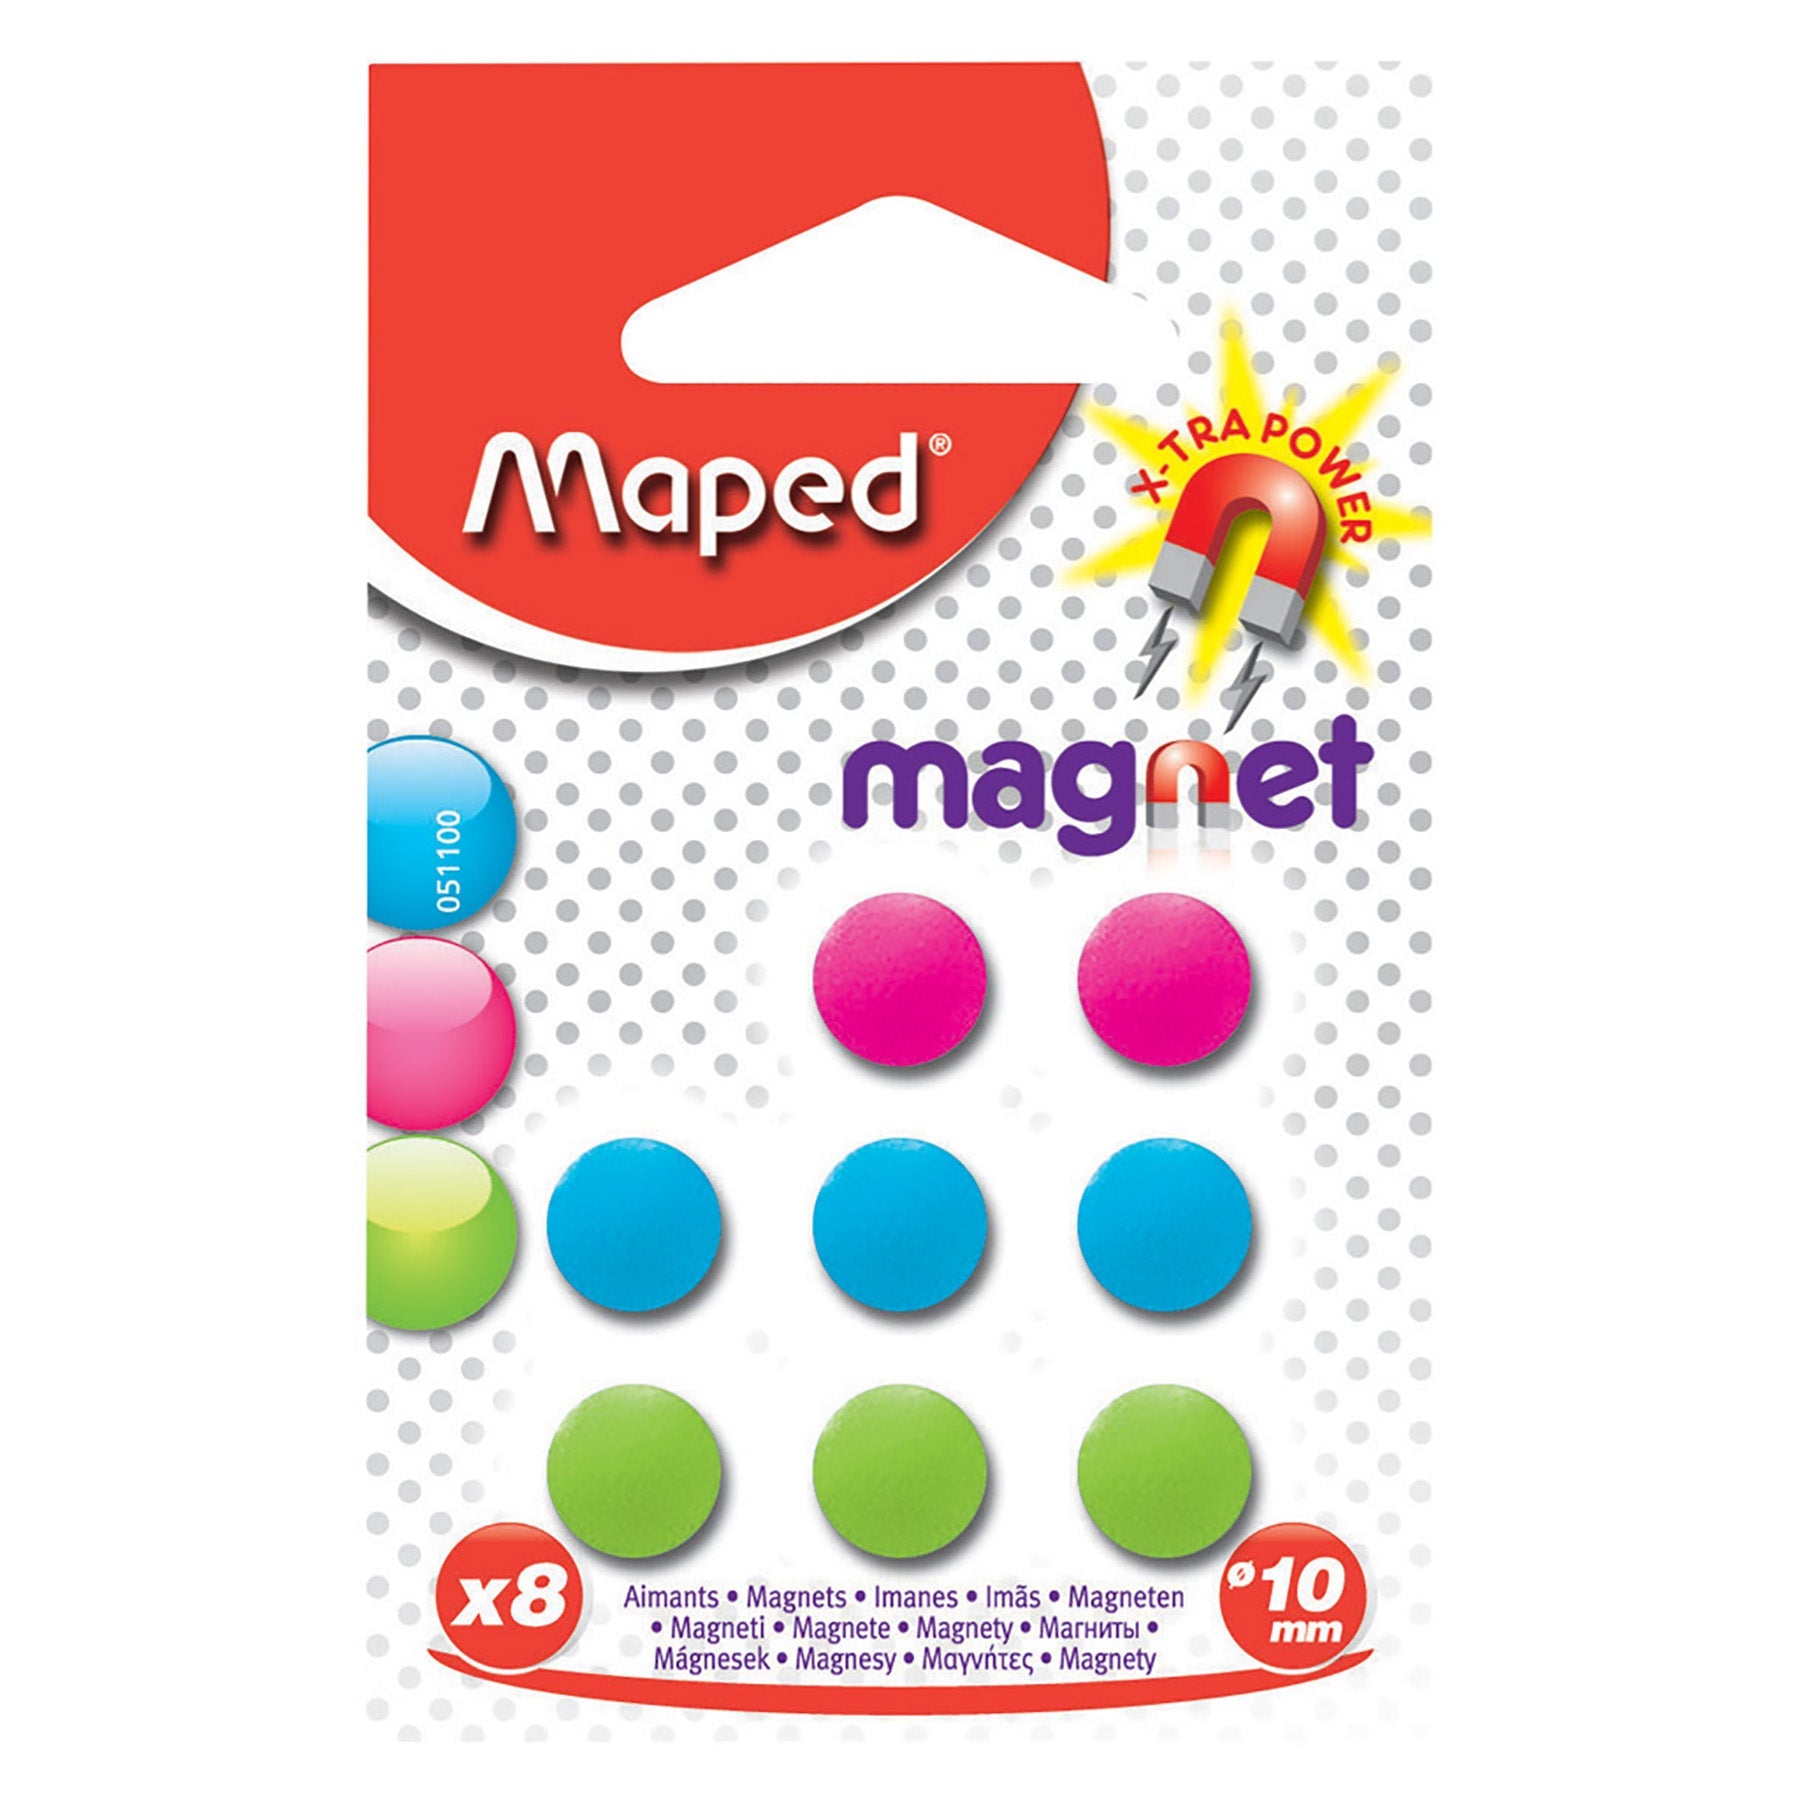 Maped 8 Magnets Round Plastic 0.4in